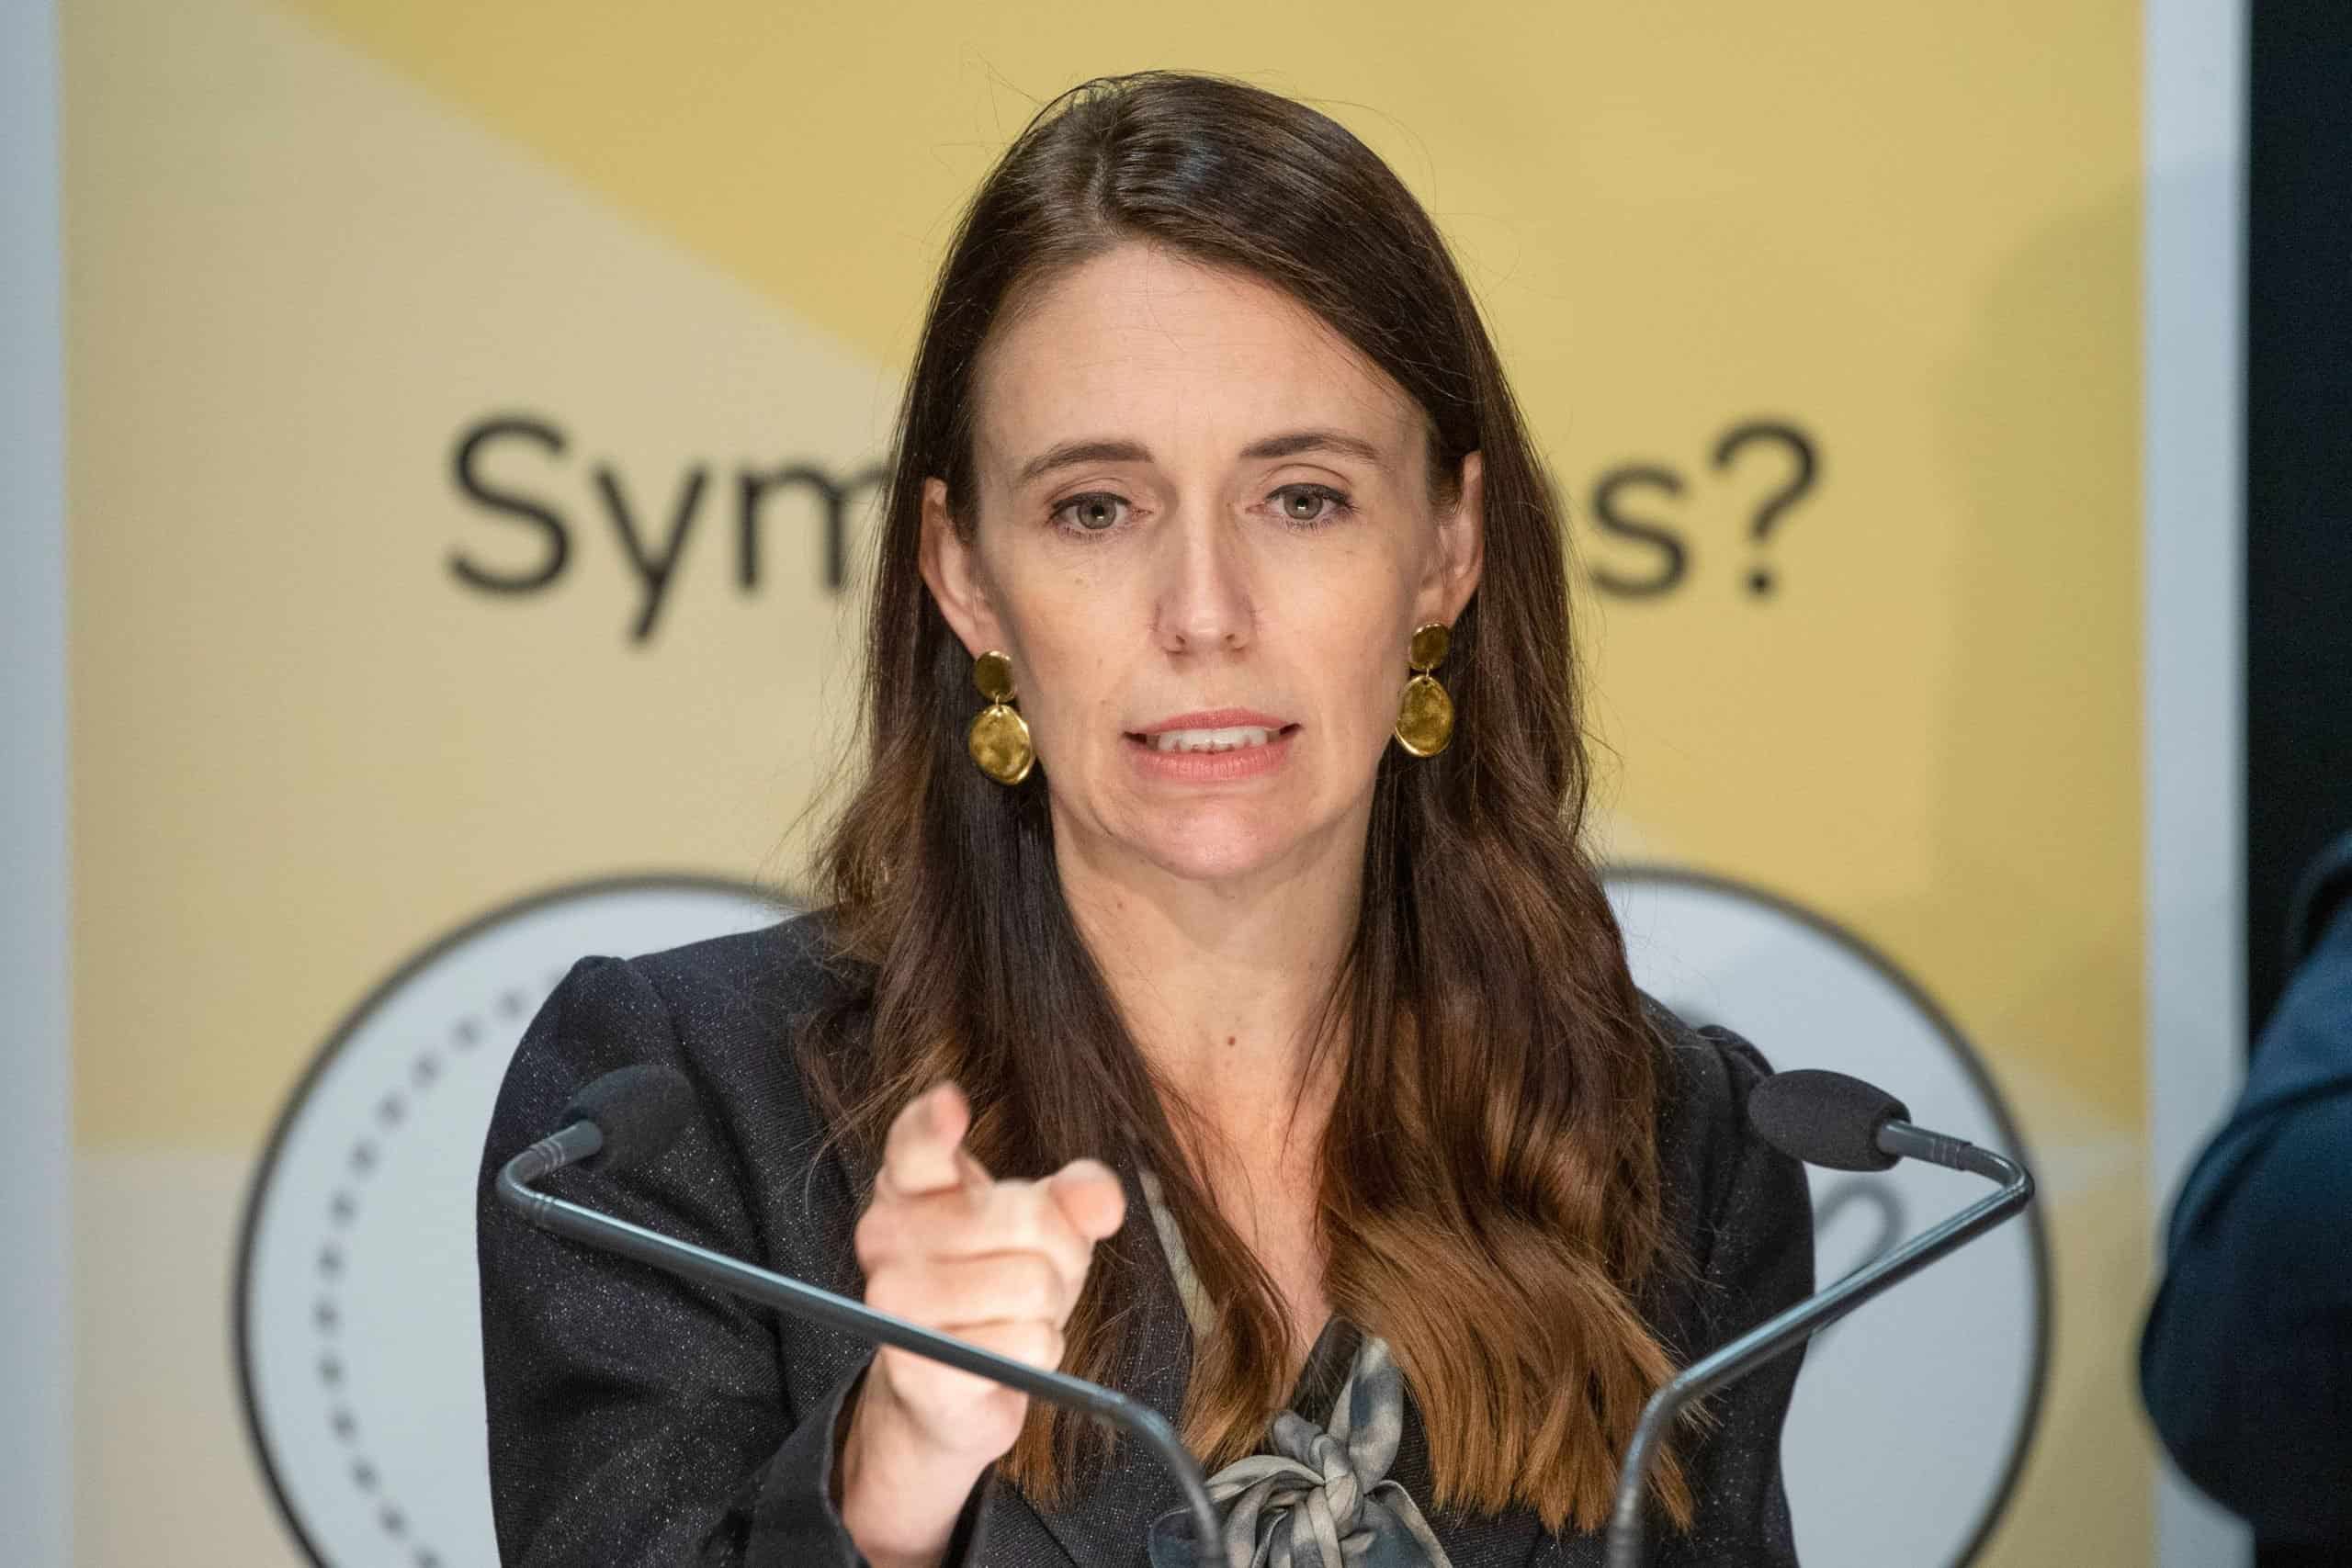 Jacinda Ardern buries journalist for asking sexist question